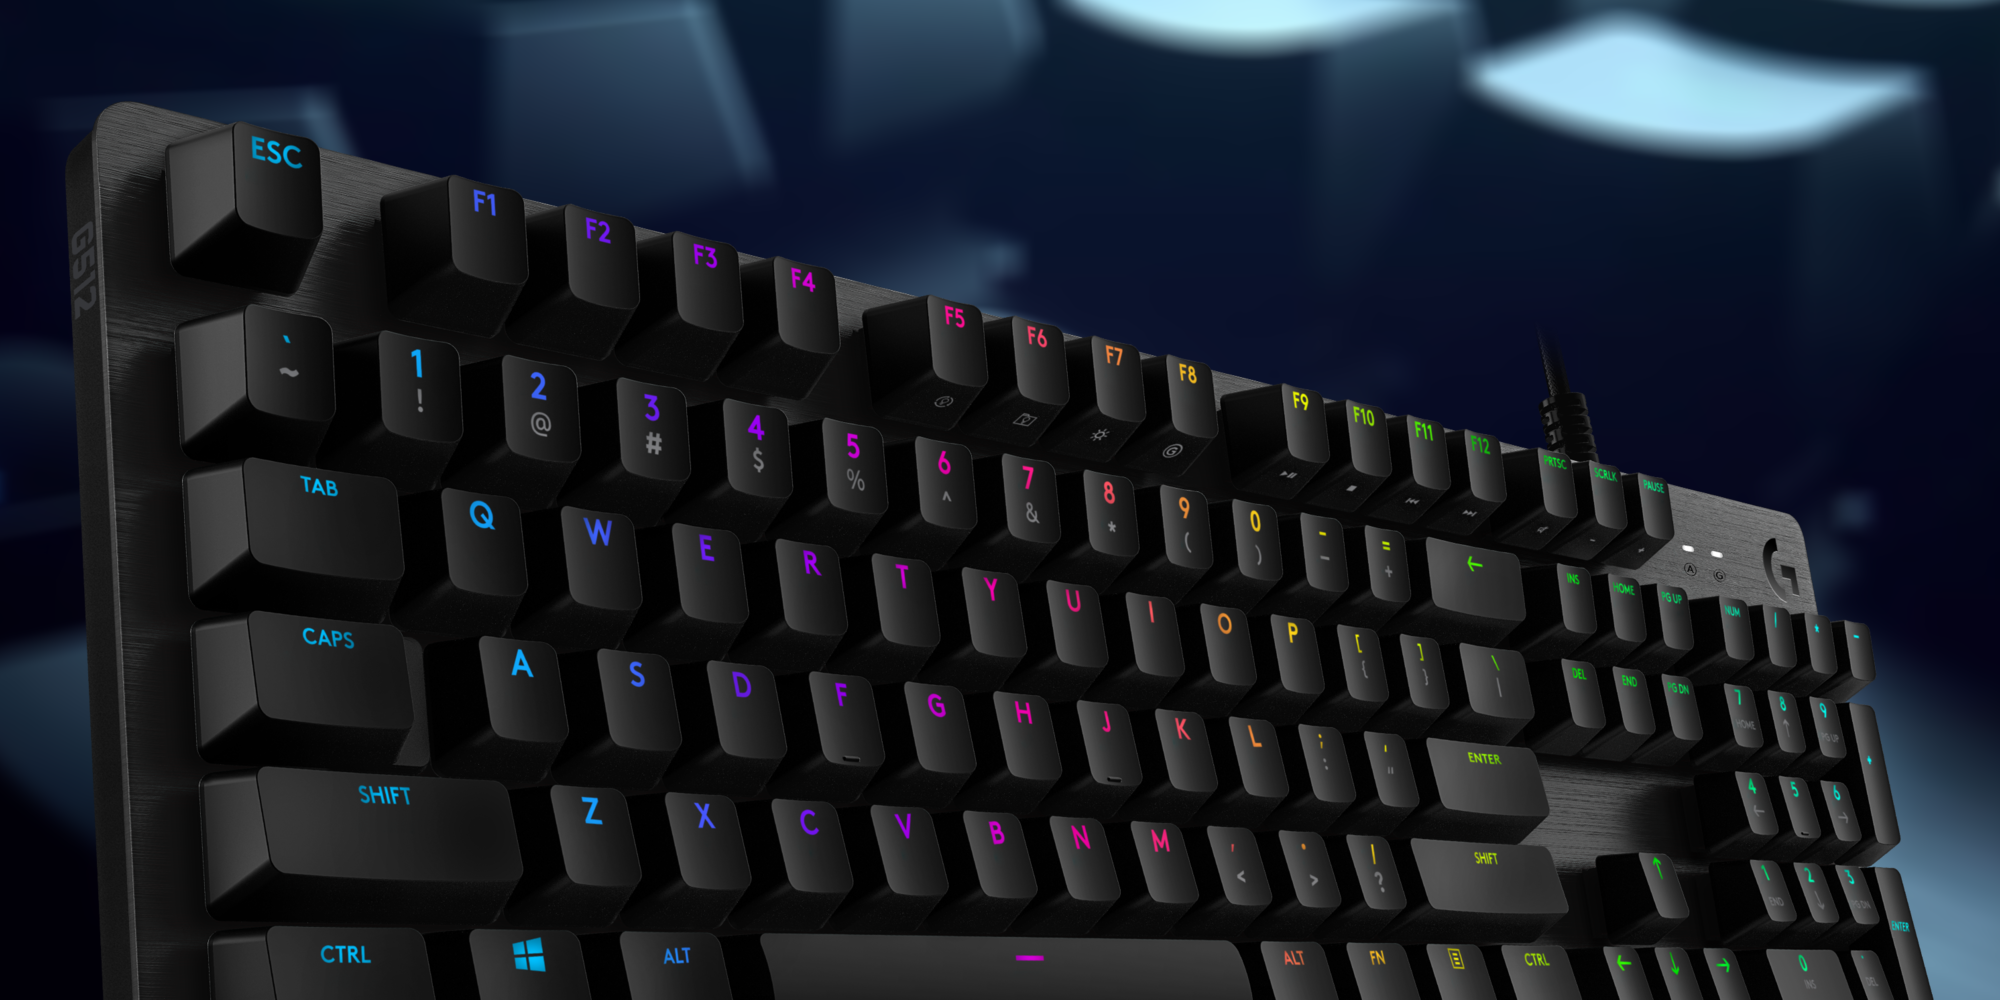 https://9to5toys.com/wp-content/uploads/sites/5/2019/05/logitech-g512-carbon-rgb-mechanical-gaming-keyboard.png